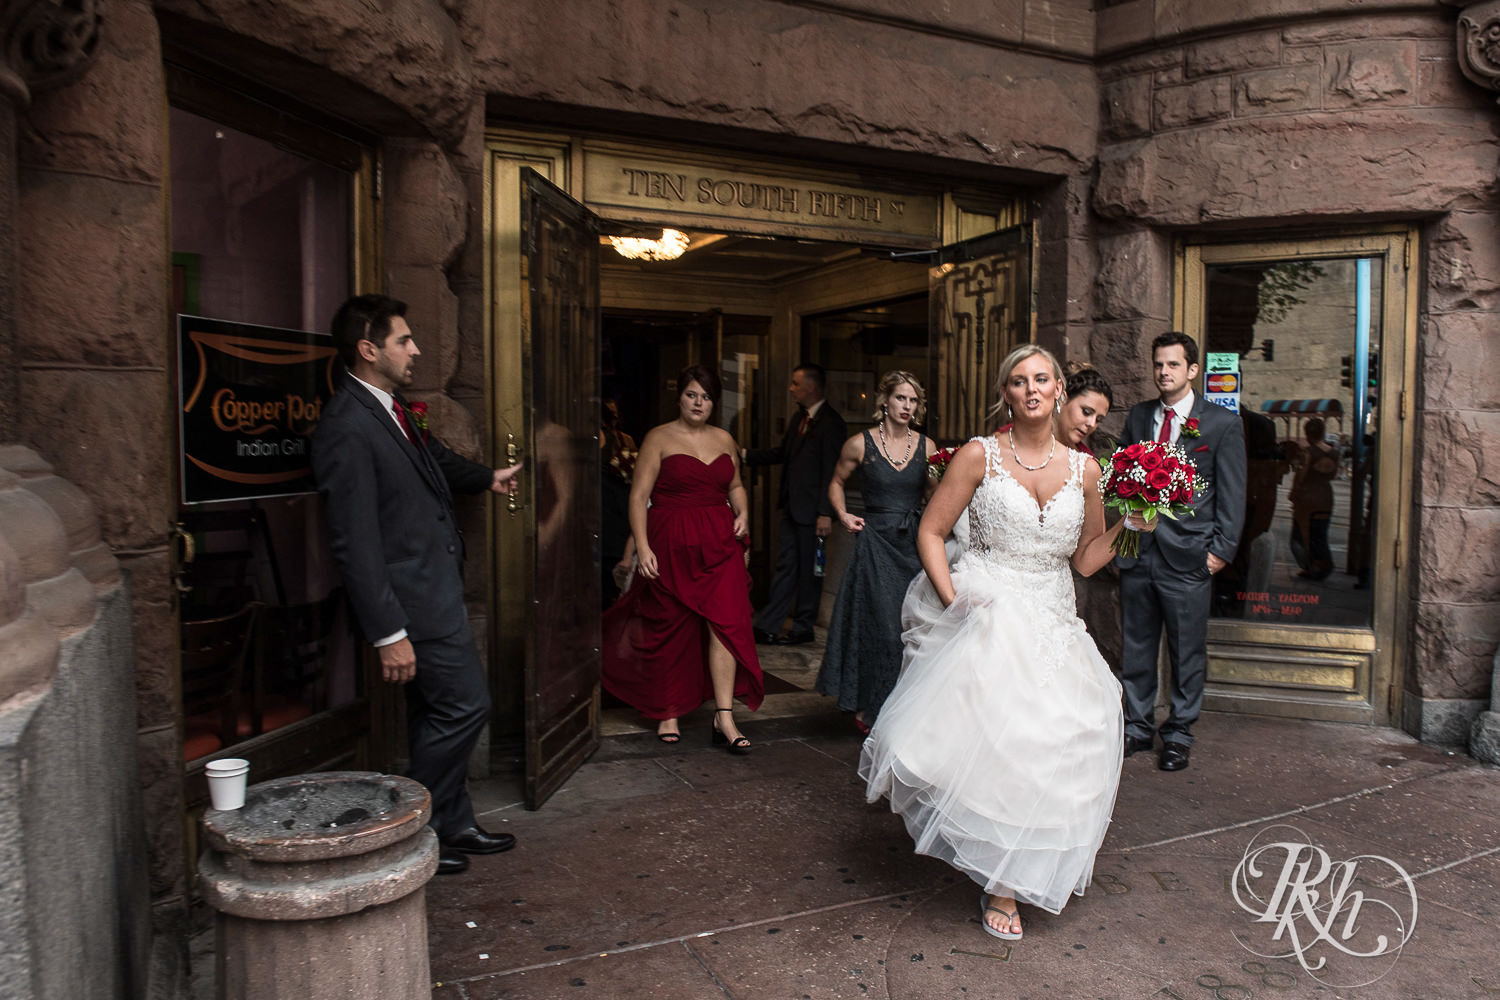 Wedding party smiles on wedding day at Lumber Exchange Event Center in Minneapolis, Minnesota.